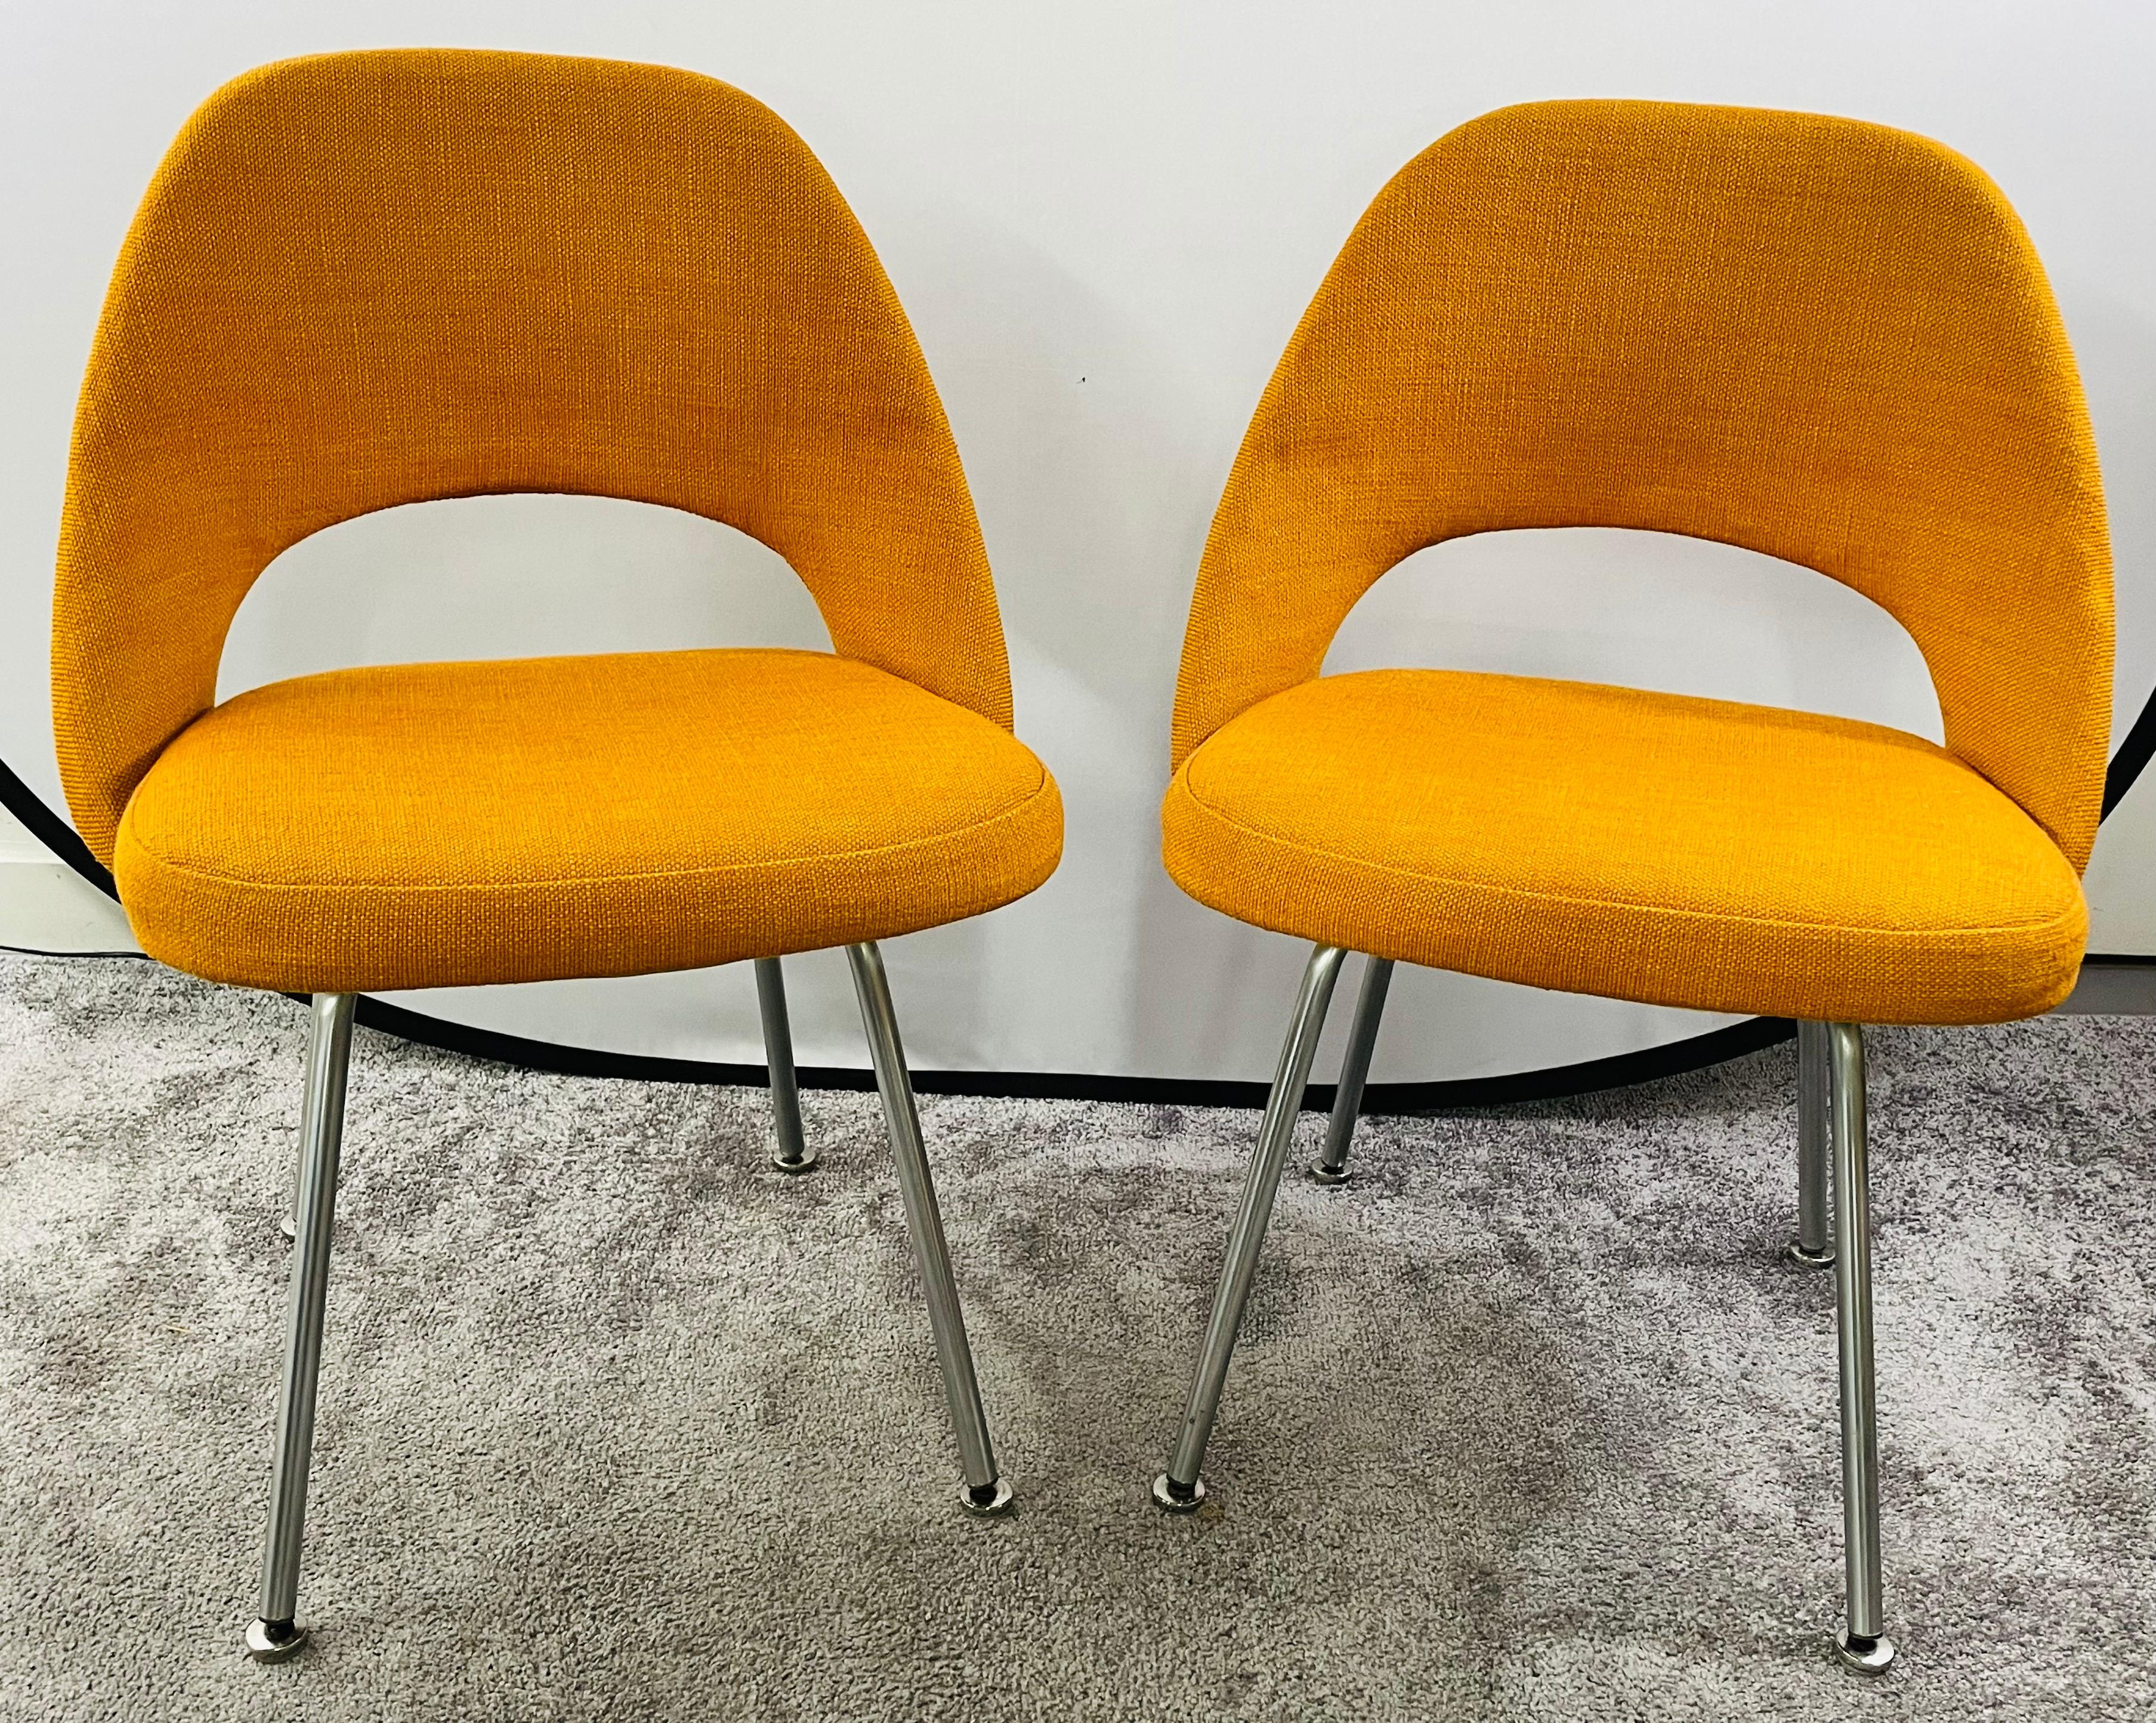 A pair of Mid-Century Modern side chairs designed by Eero Sarrinen (Finnish/American, 1910-1961) for Knoll Associates, USA. The chairs are finely upholstered in a stylish turmeric orange tone. The chairs are marked with the manufacturer label